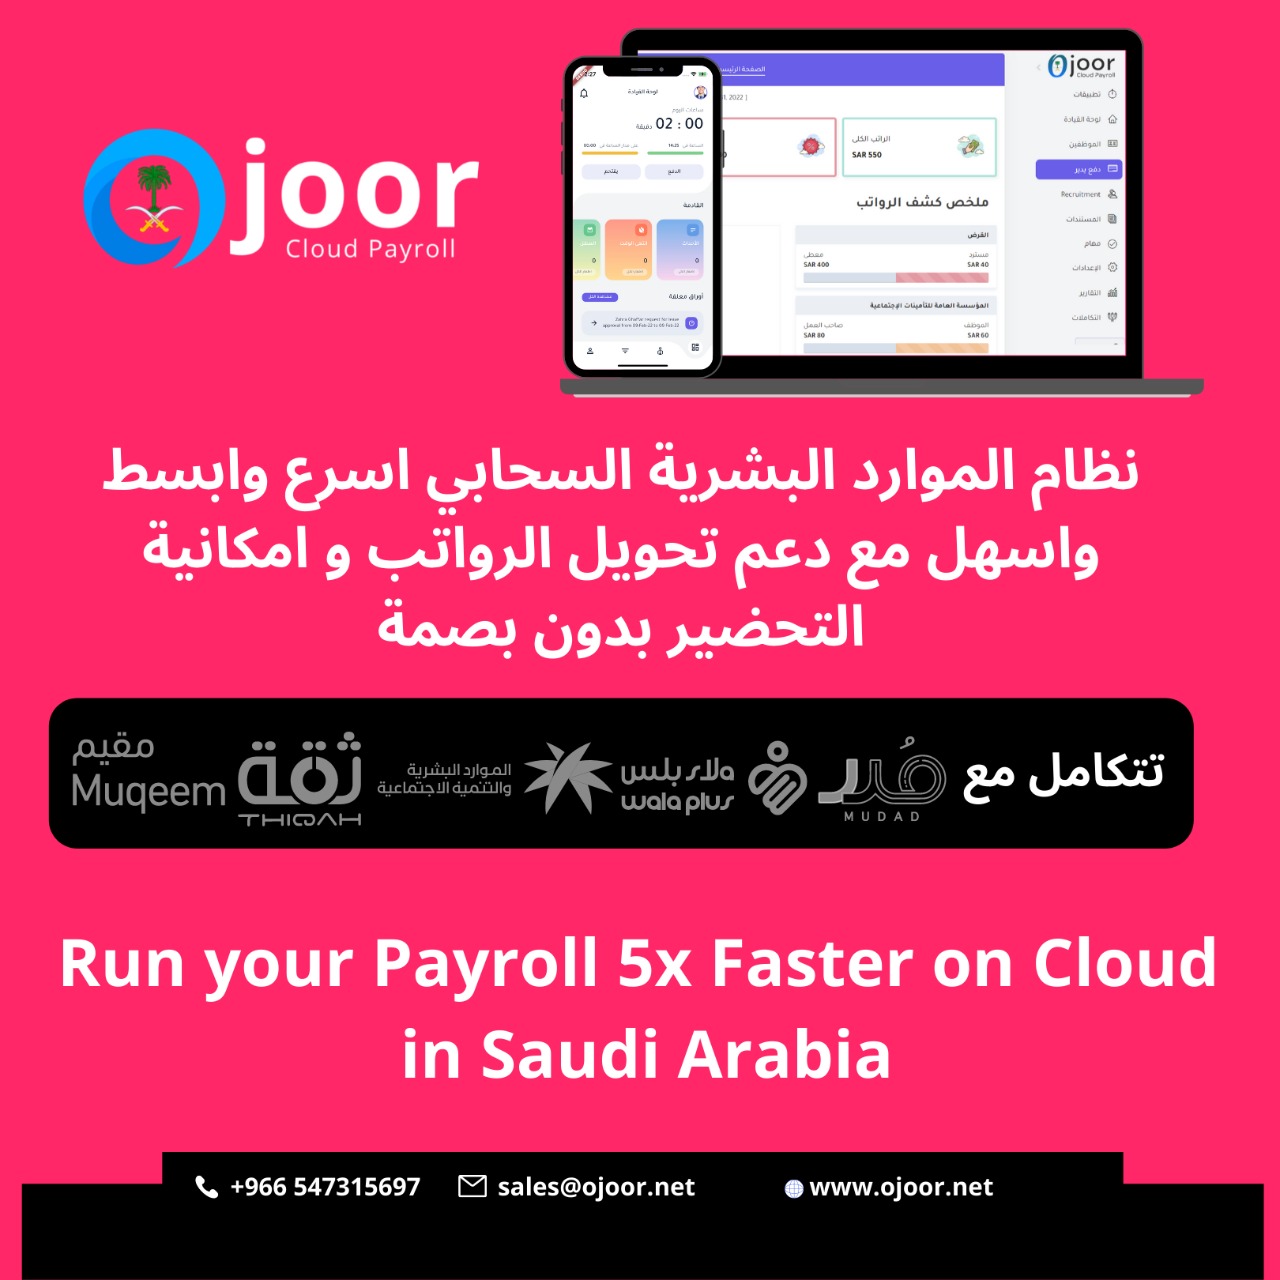 Which are the 9 key features that make a Payroll System in Saudi Perfect ?